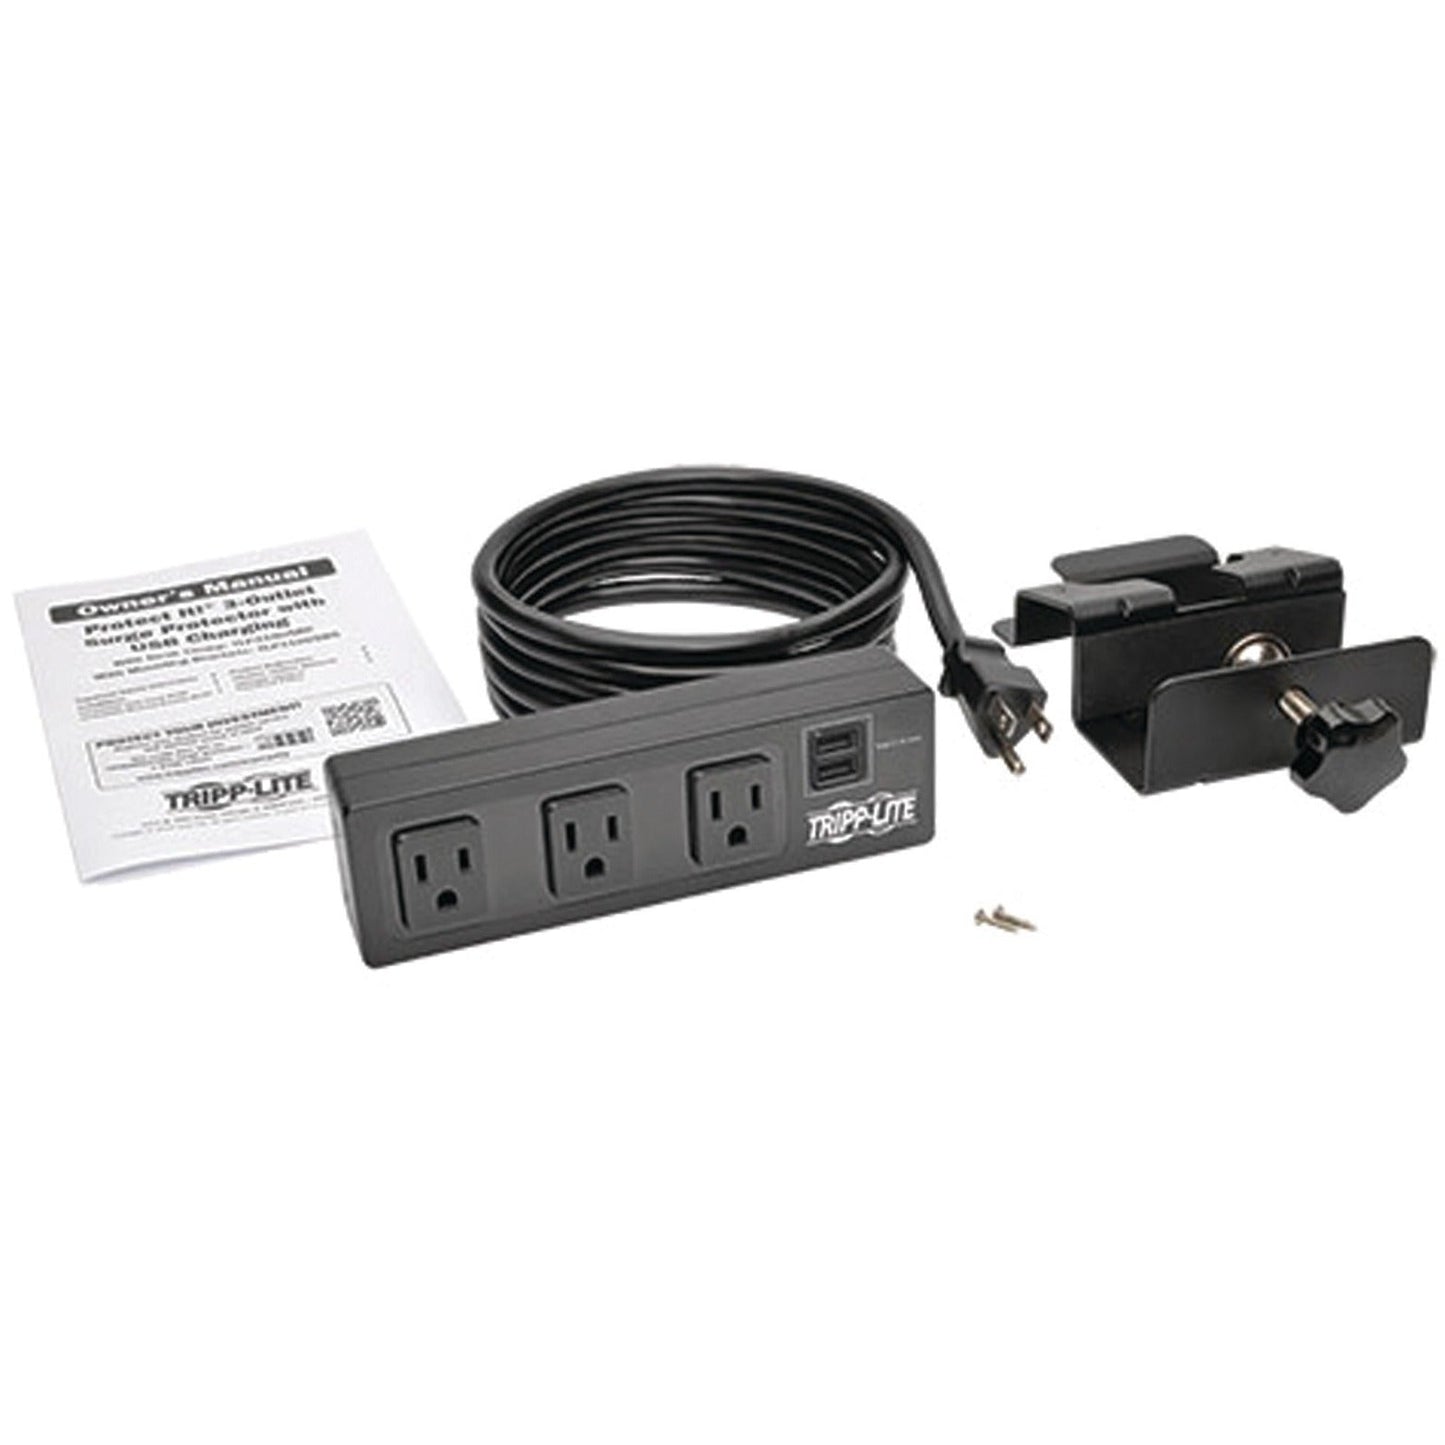 Tripp Lite Protect It! 3-Outlet Surge Protector with Desk Clamp 10 ft. Cord 510 Joules 2 USB Charging Ports Black Housing